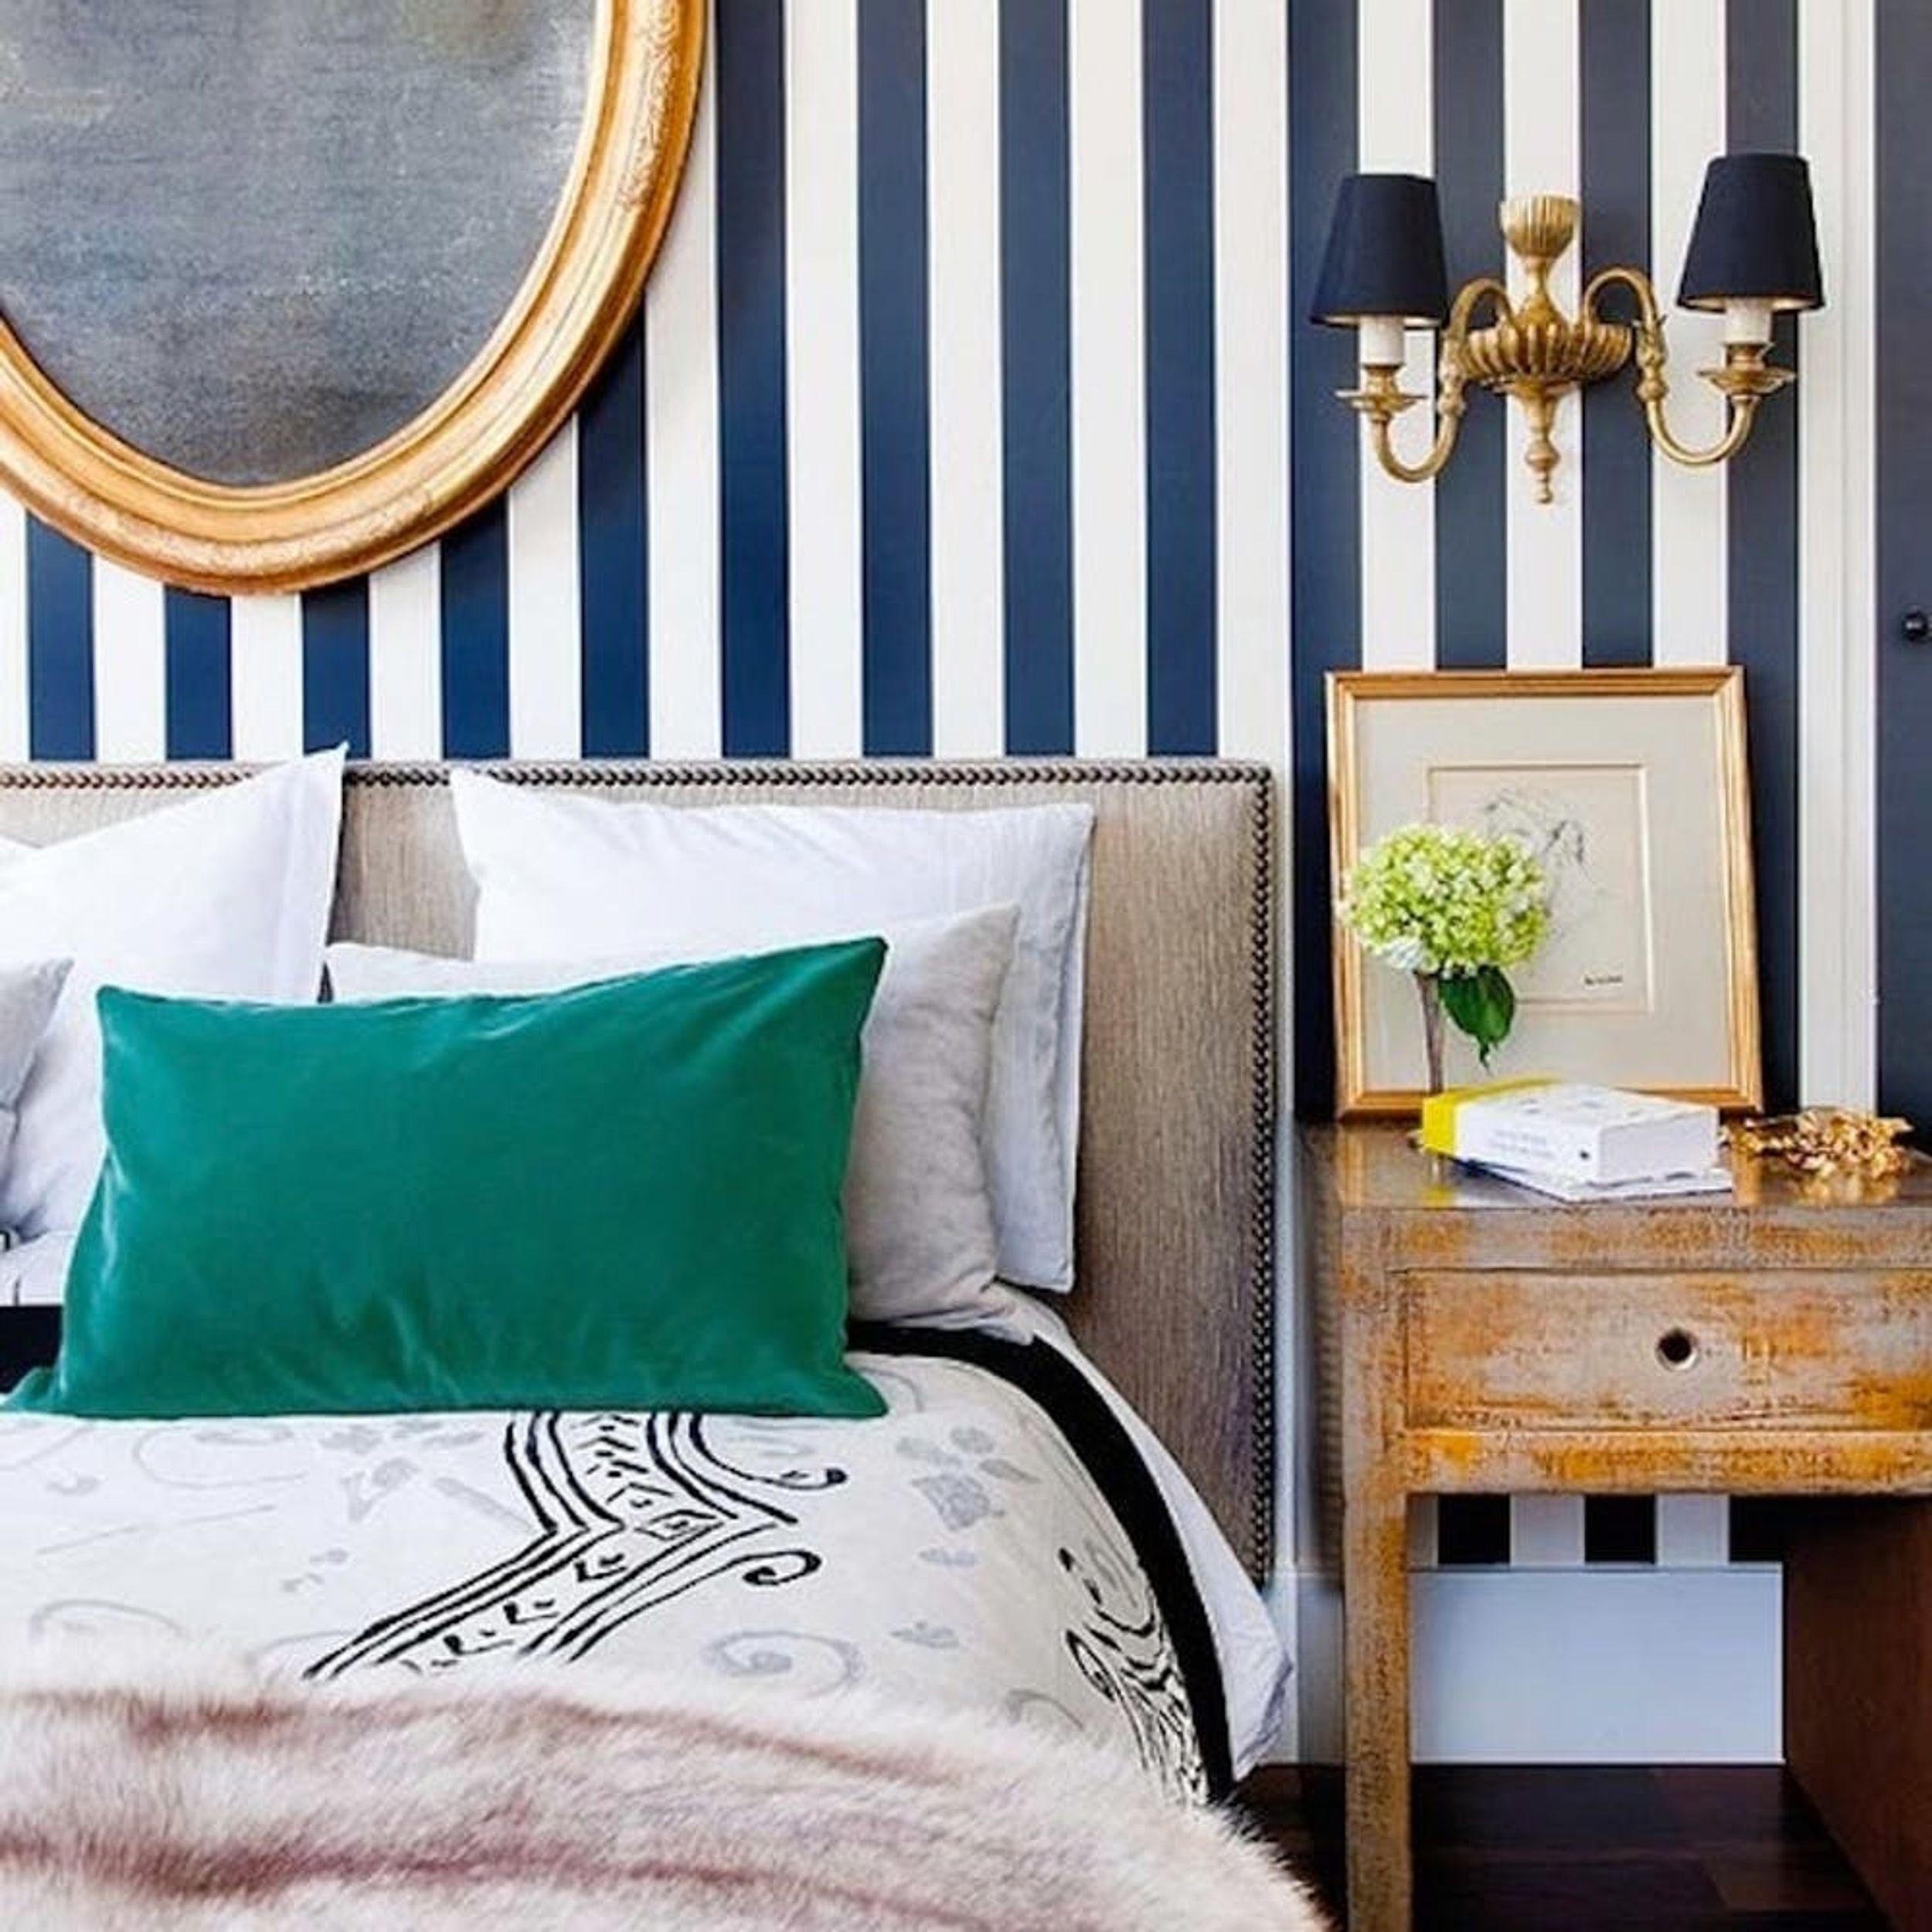 14 Magnifique Ways to Decorate like a French Girl